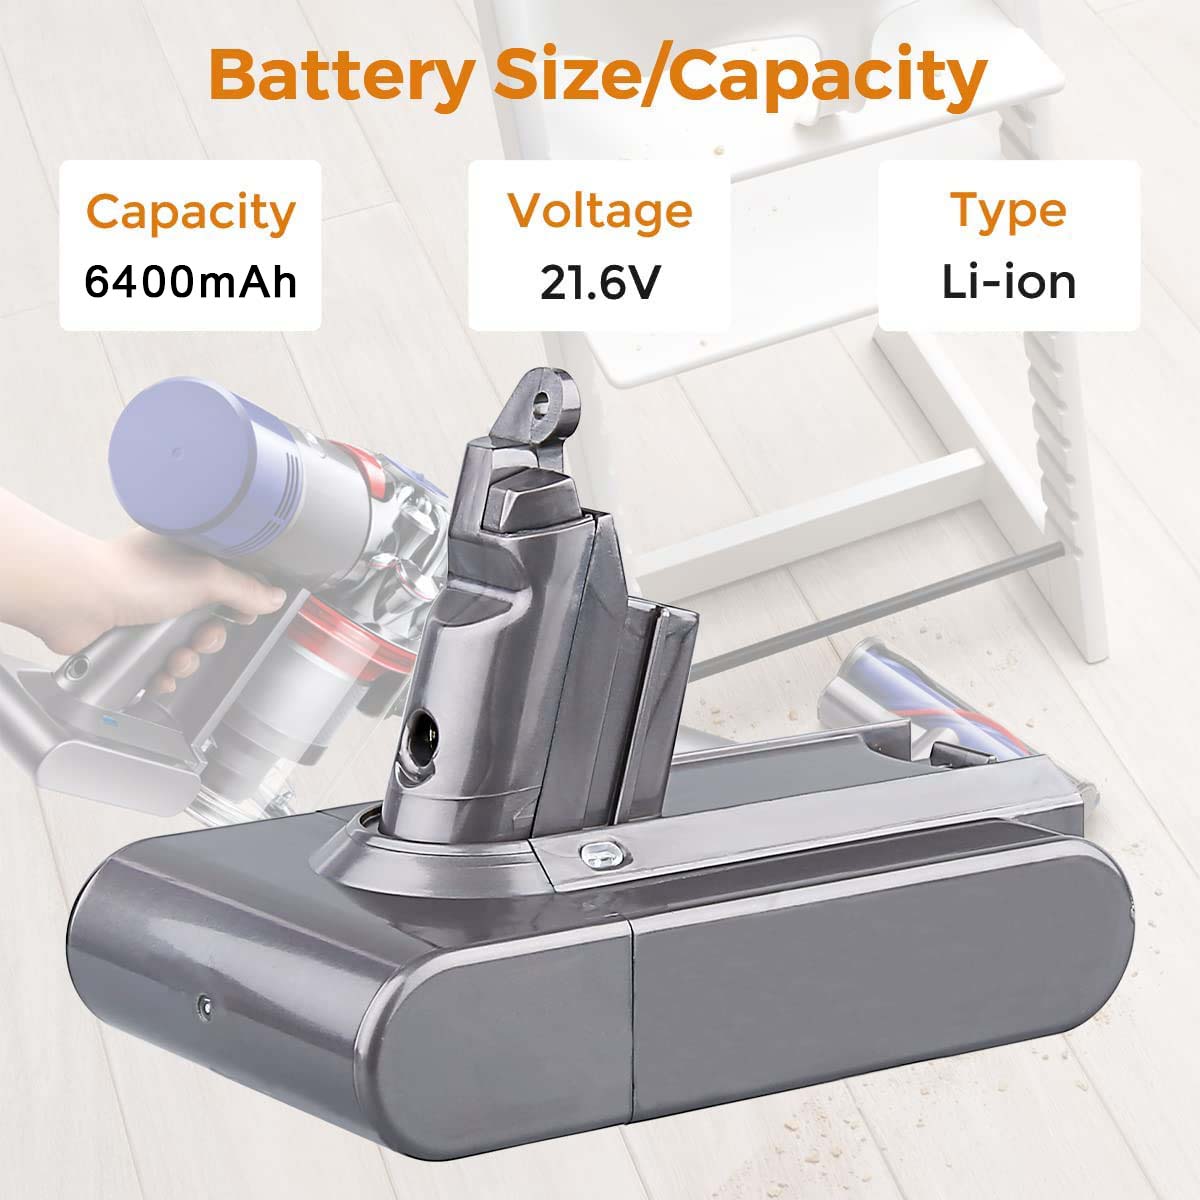 Dyson DC44, DC45 Animal Handheld Rechargeable Battery, 917083-04